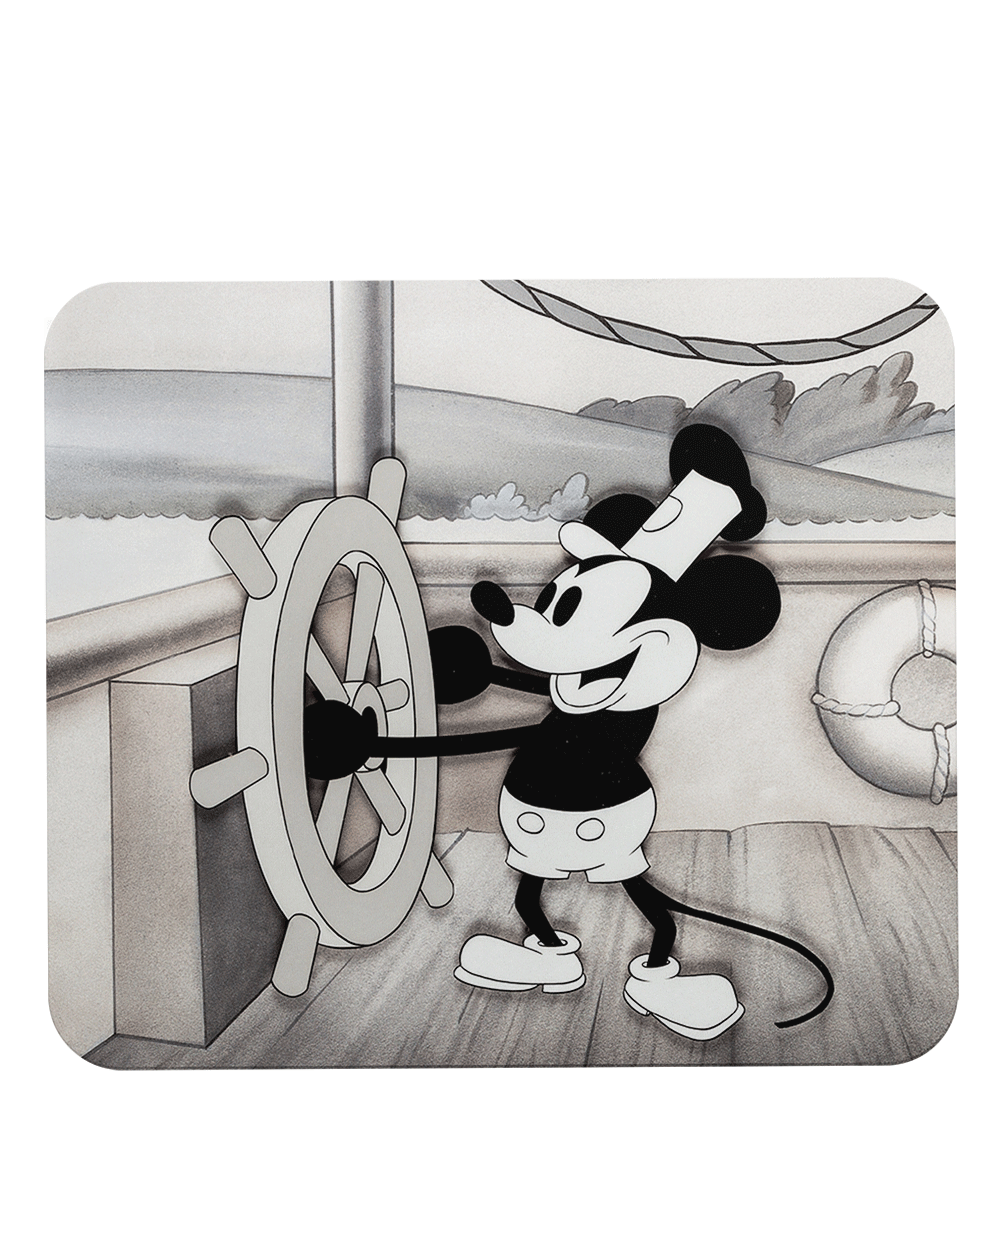 Steamboat Willy Mouse Pad with Nonslip Base (SIZE 8"x9")